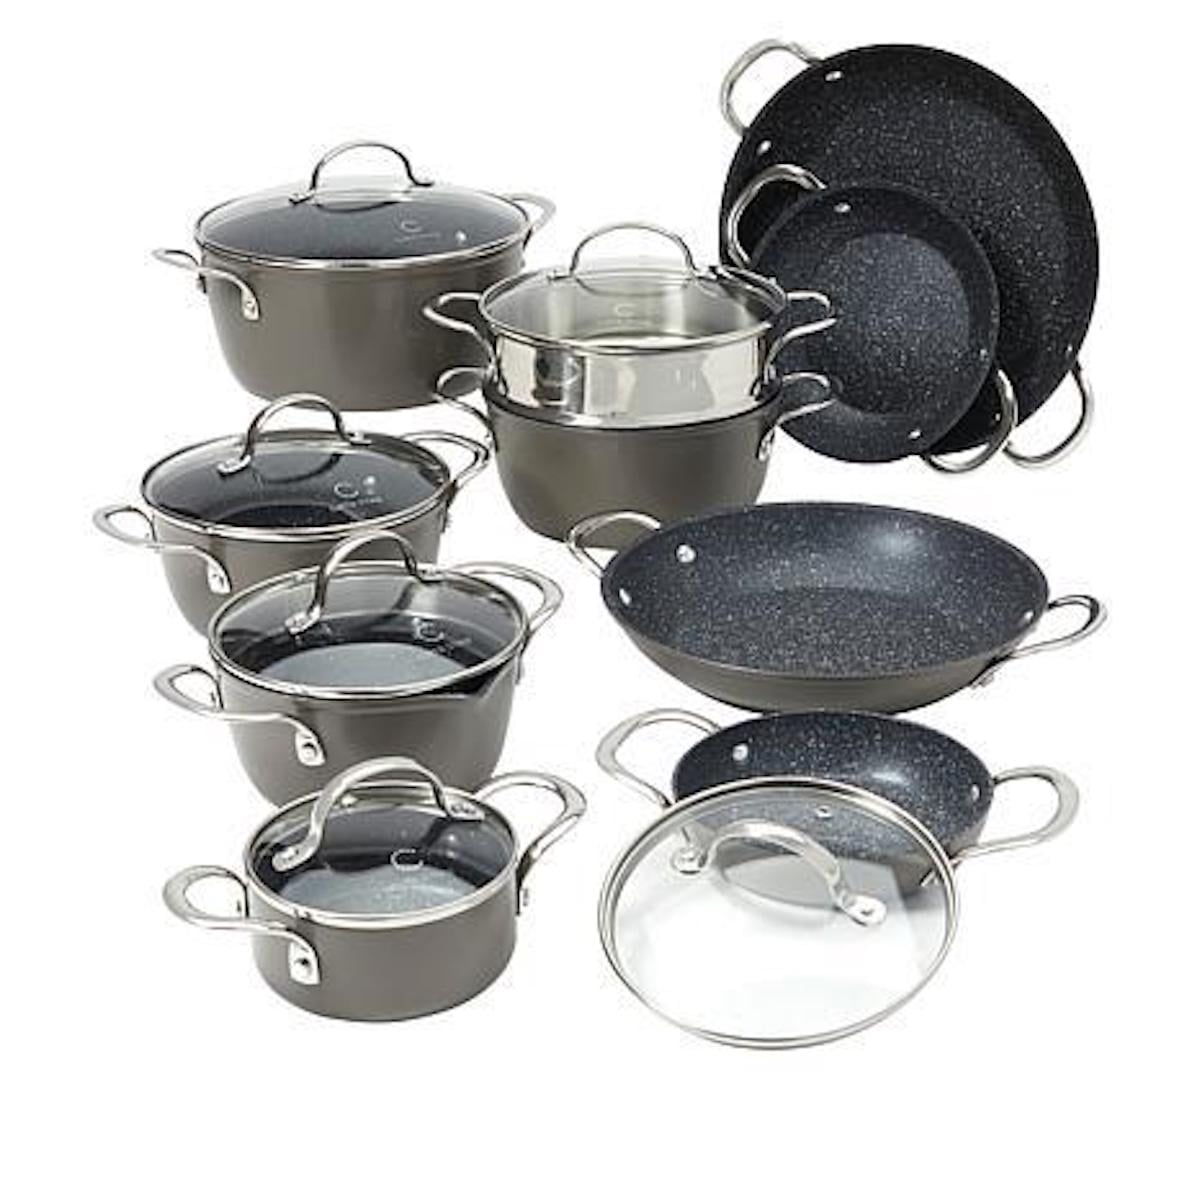 Curtis Stone Dura-Pan Nonstick 16-piece Nesting Cookware Set-Used 